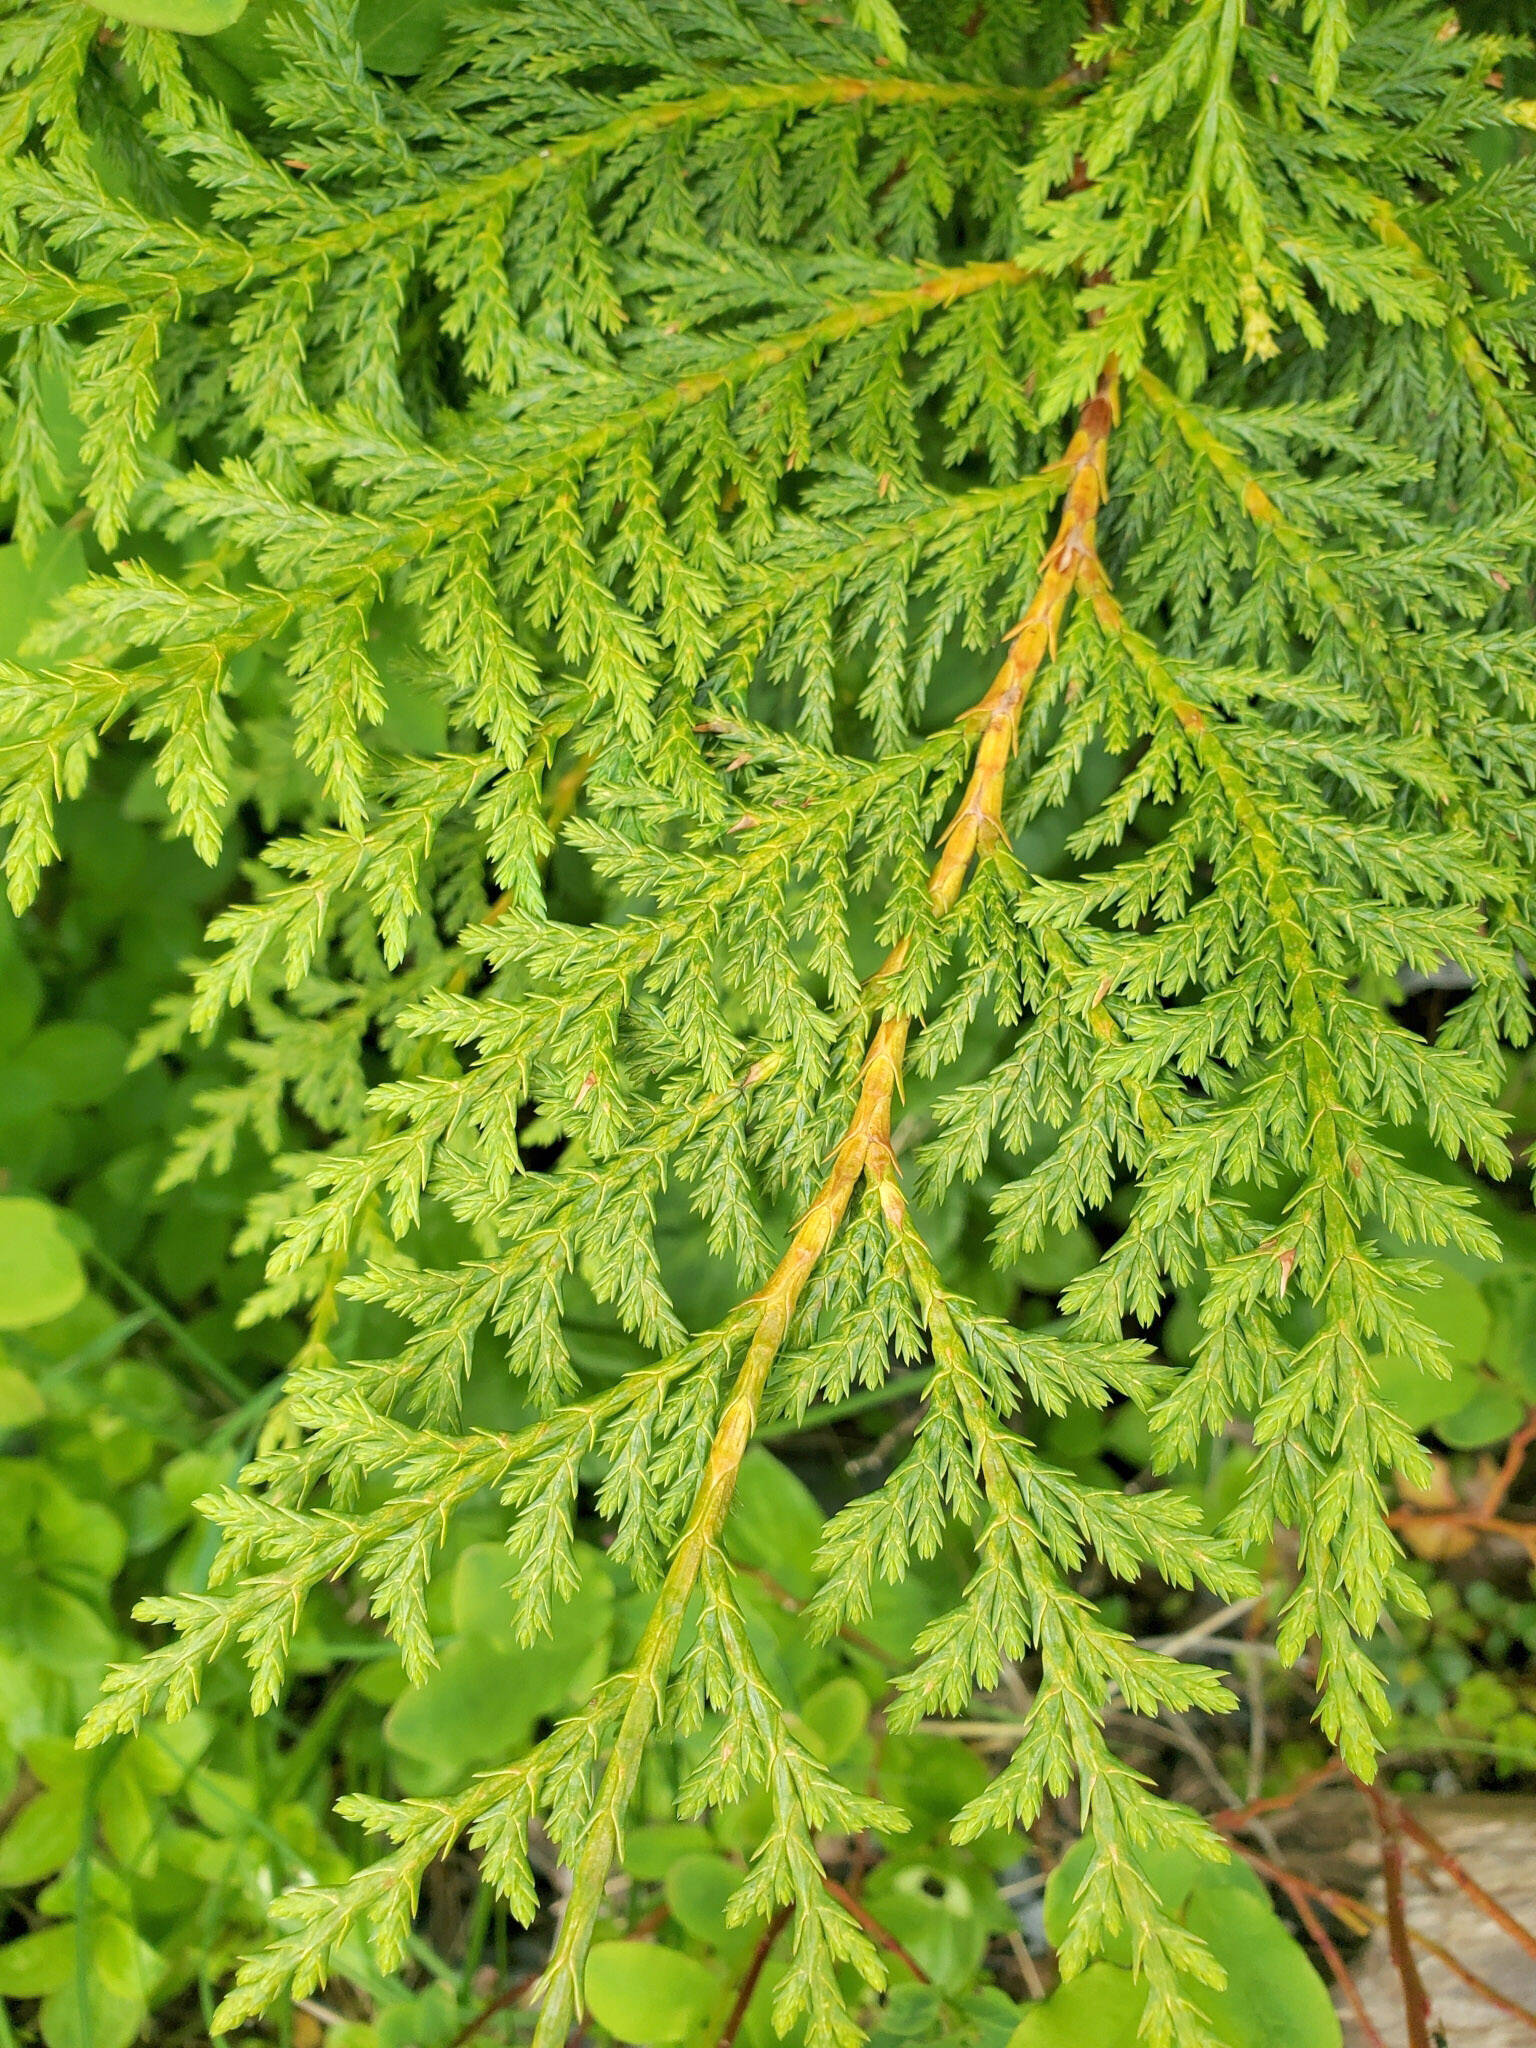 Scaly, pale green leaves of a yellow cedar near Sitka, Alaska. (Photo by M. Goff http://www.sitkanature.org/)